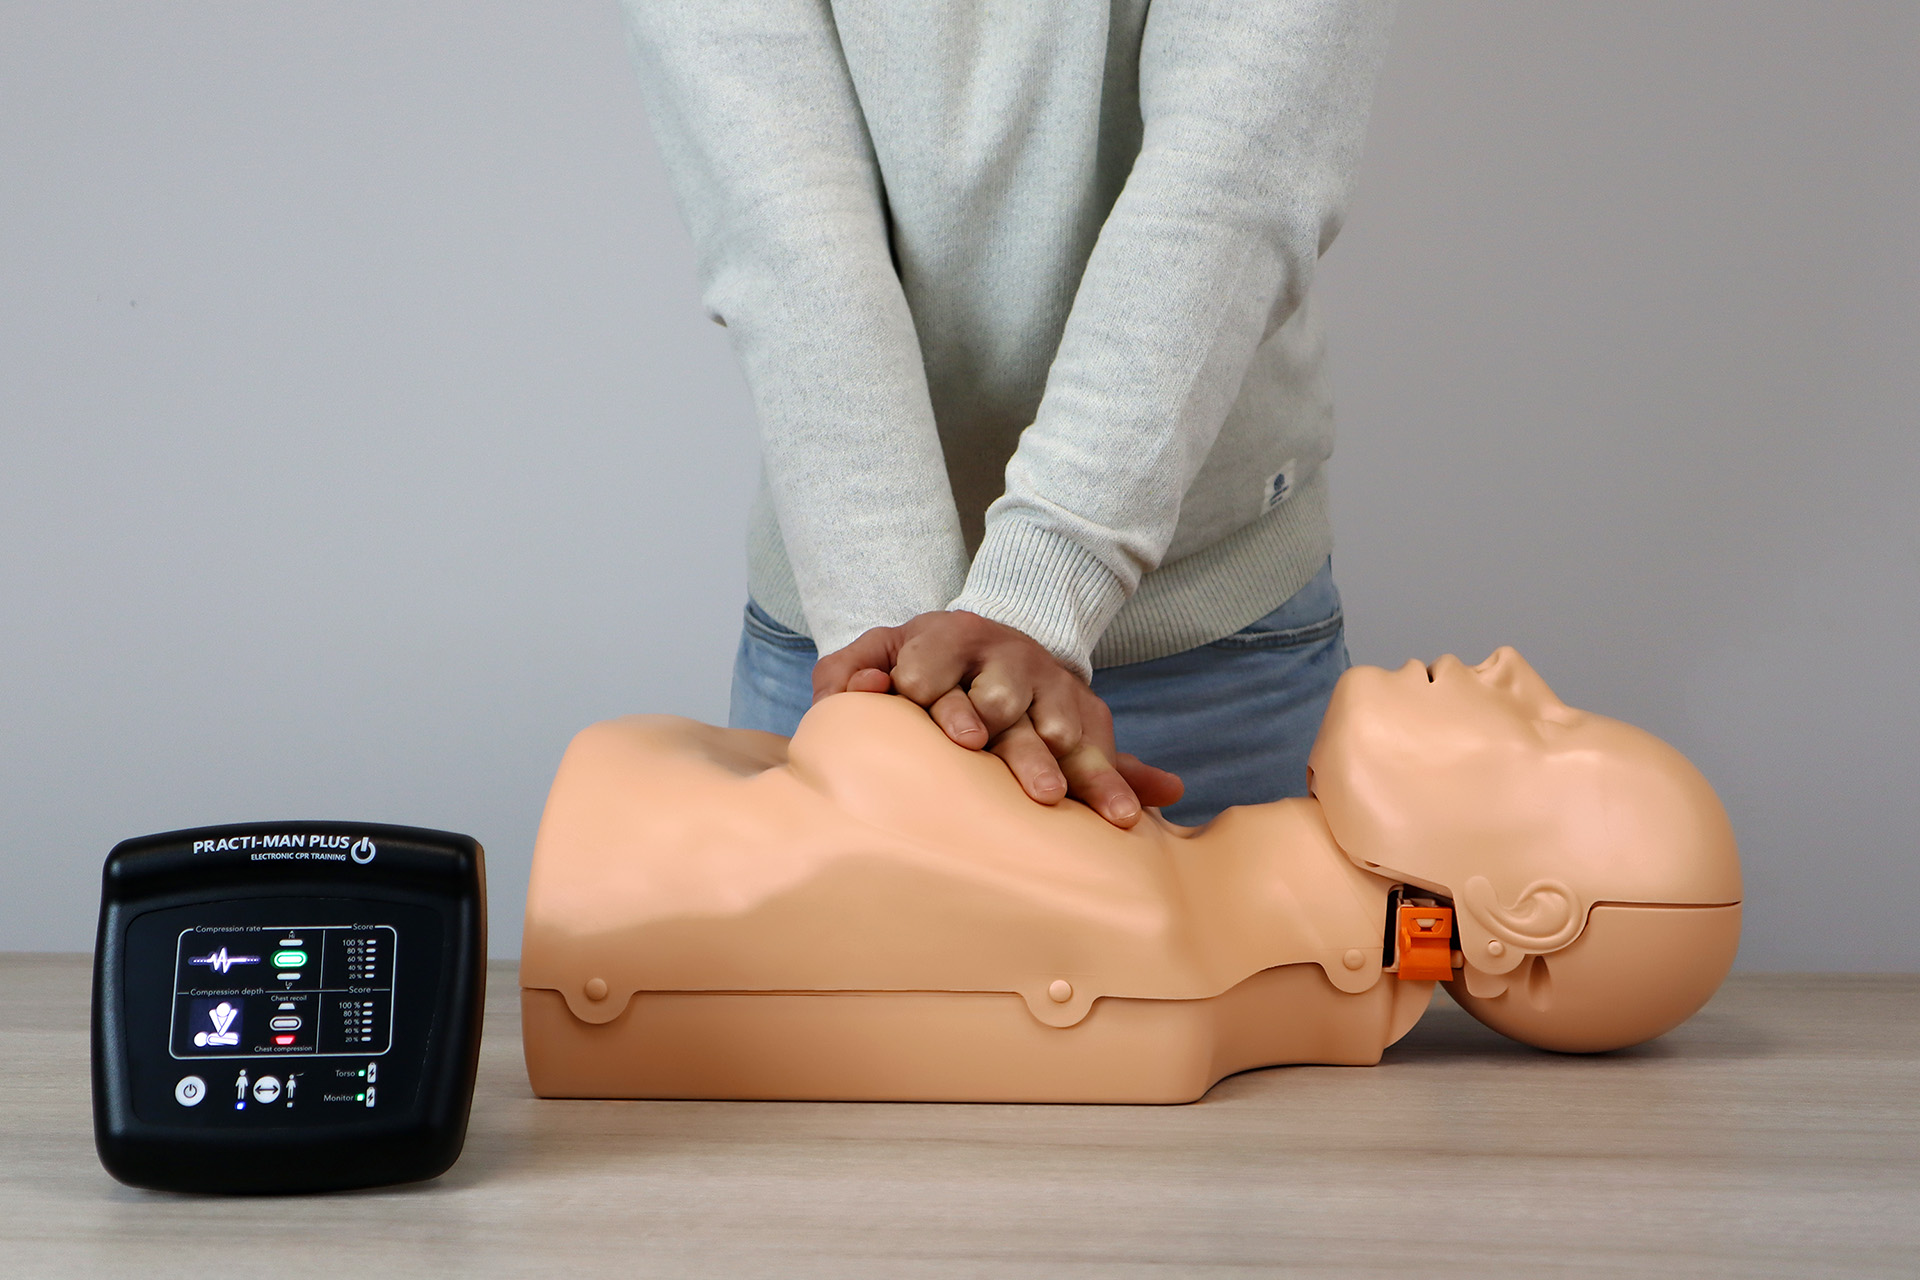 Female Skin: How to improve CPR on women